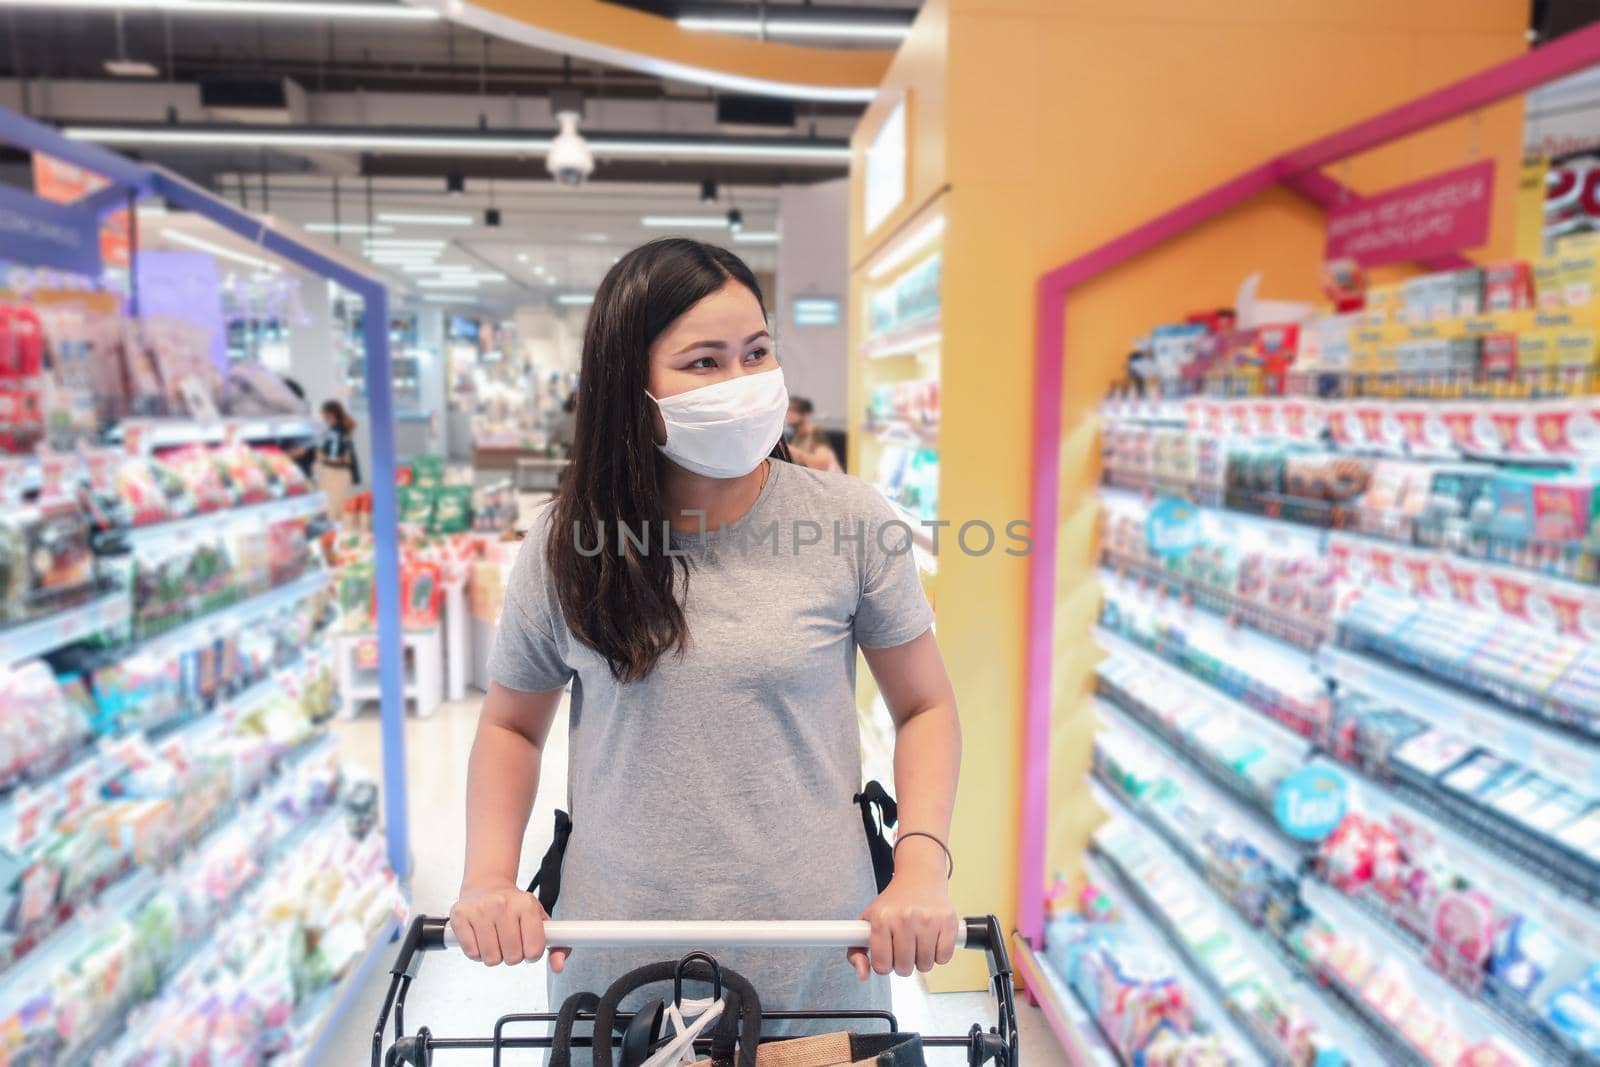 Customer Asian Woman Wearing Face Mask With Shopping Cart in Supermarket Department Store Shop While Choosing and Looking Something on Shelf During Covid-19 Pandemic. Coronavirus Covid Situation